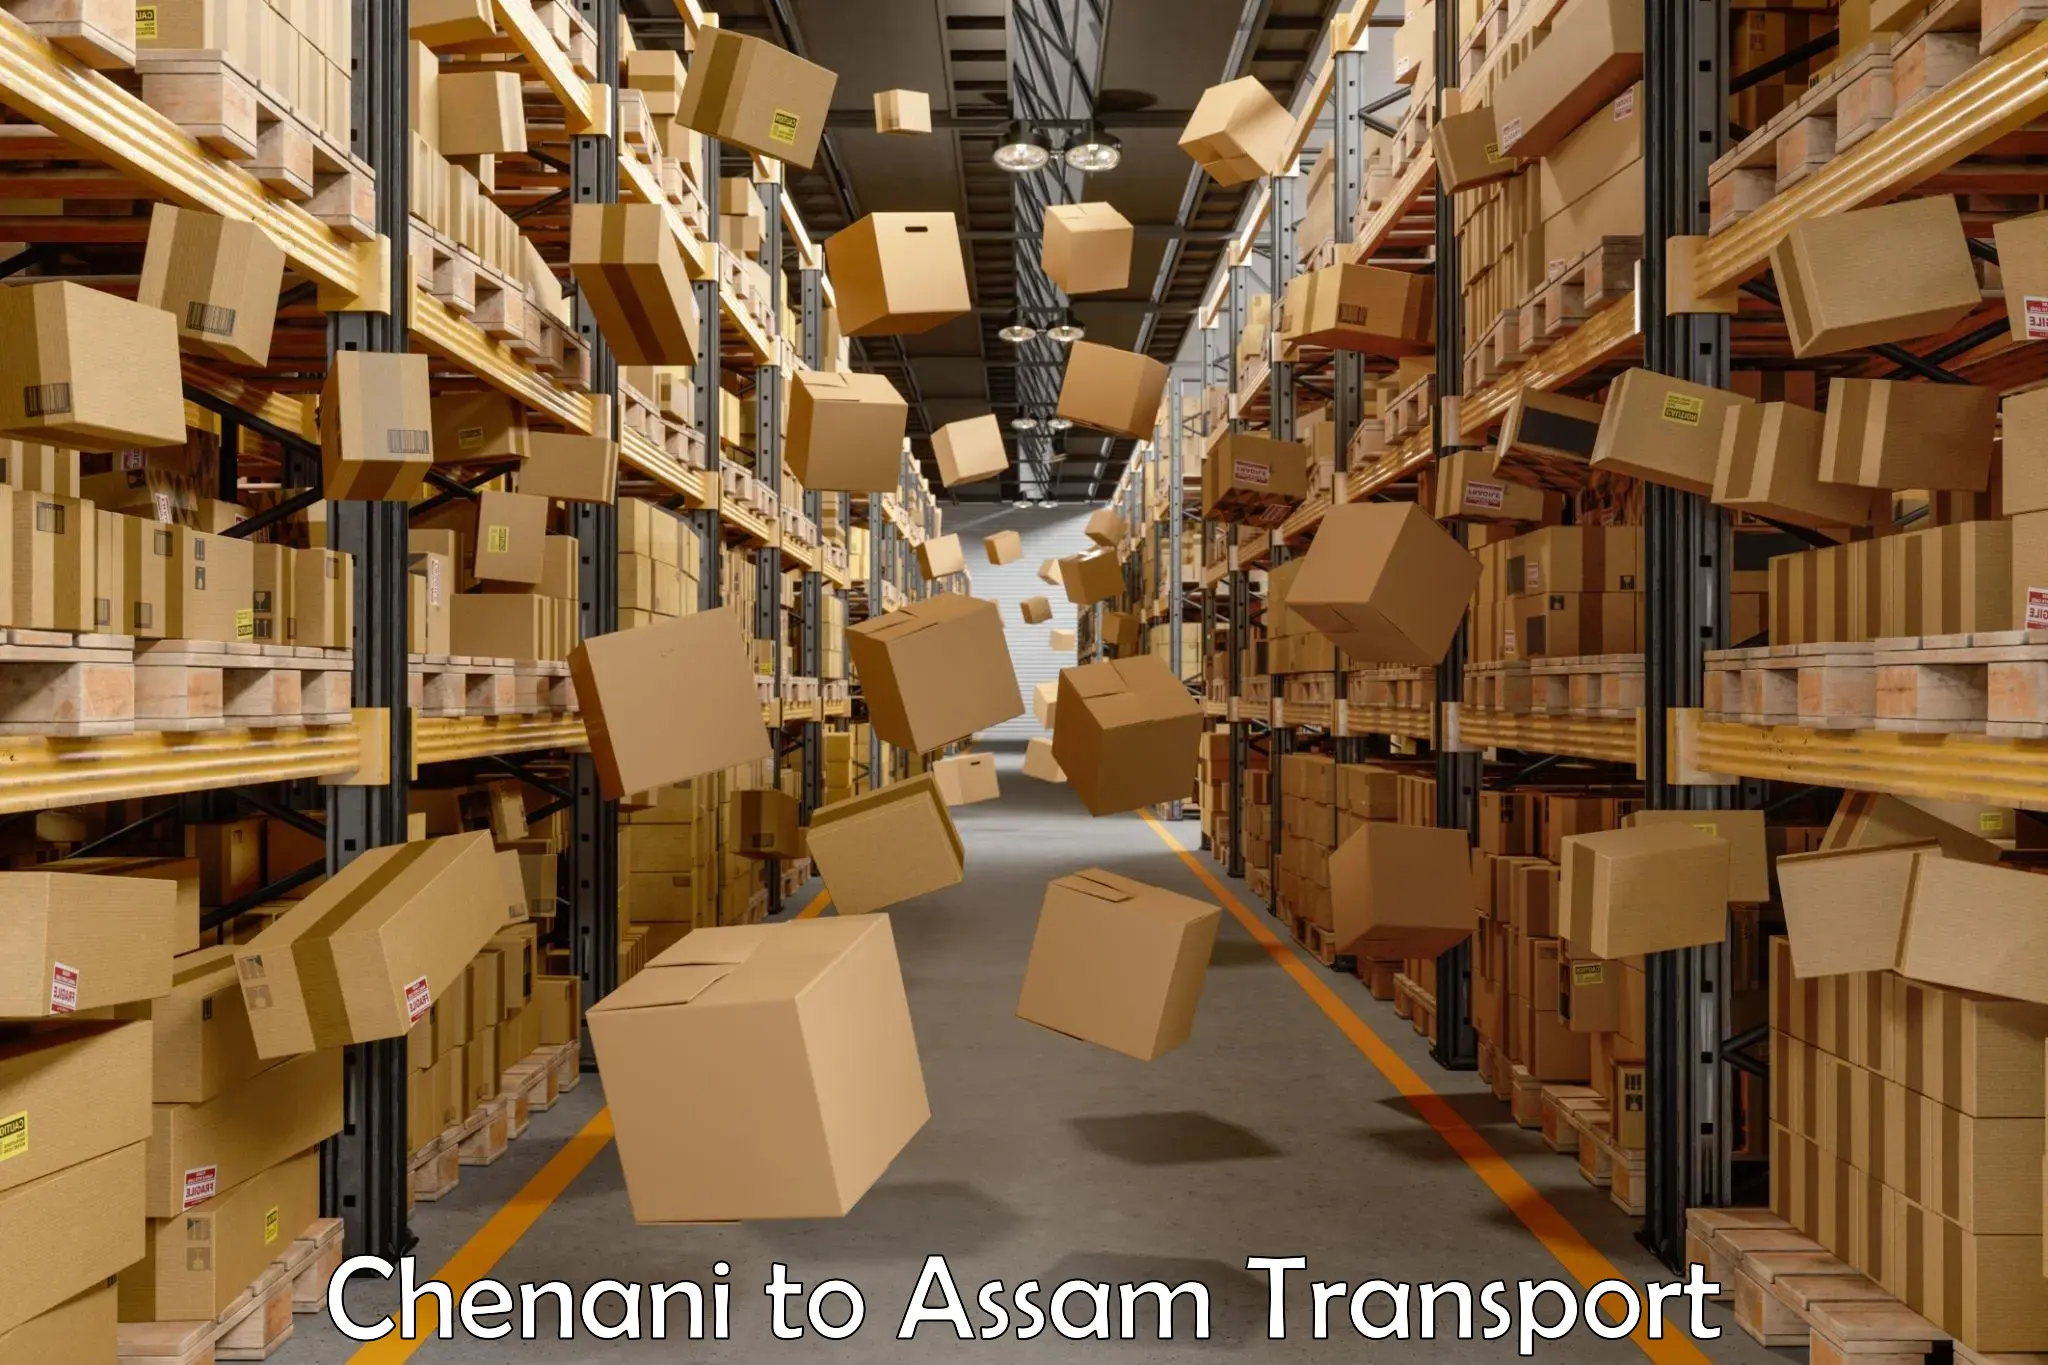 Part load transport service in India Chenani to Guwahati